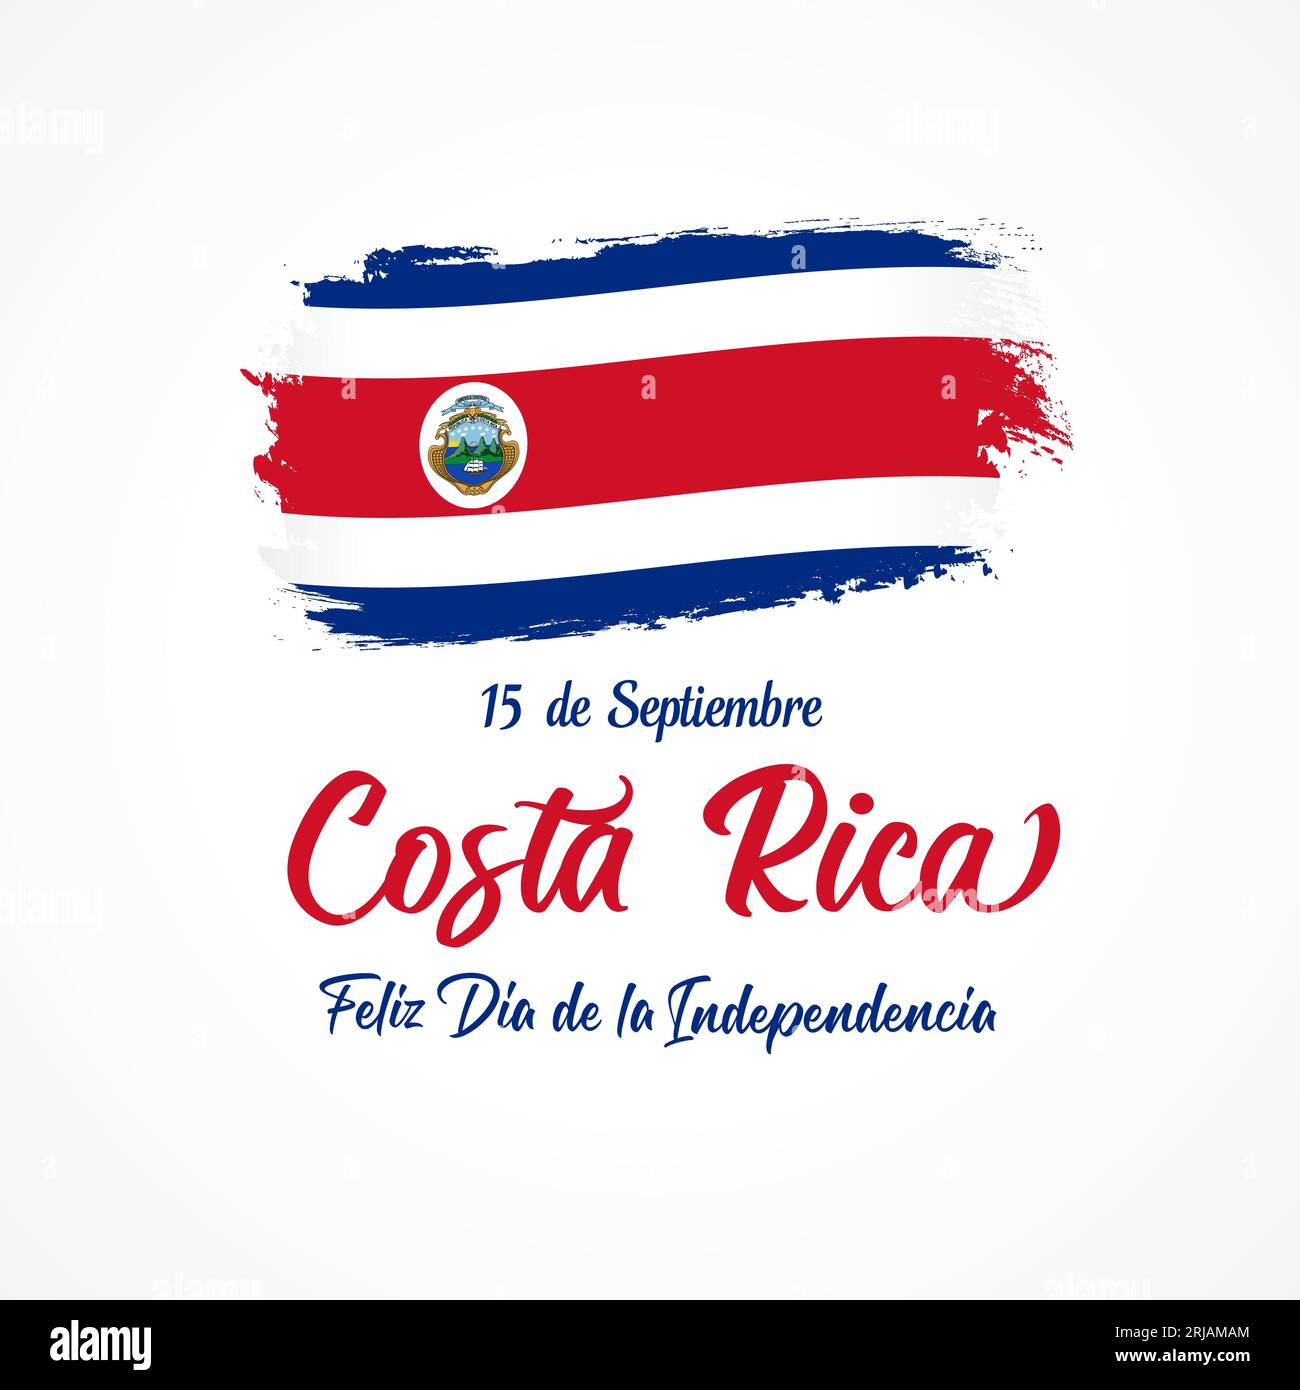 Costa Rica, Feliz Dia de la Independencia lettering and grunge flag. Spanish text - September 15, Costa Rica, Happy Independence day. Vector banner Stock Vector